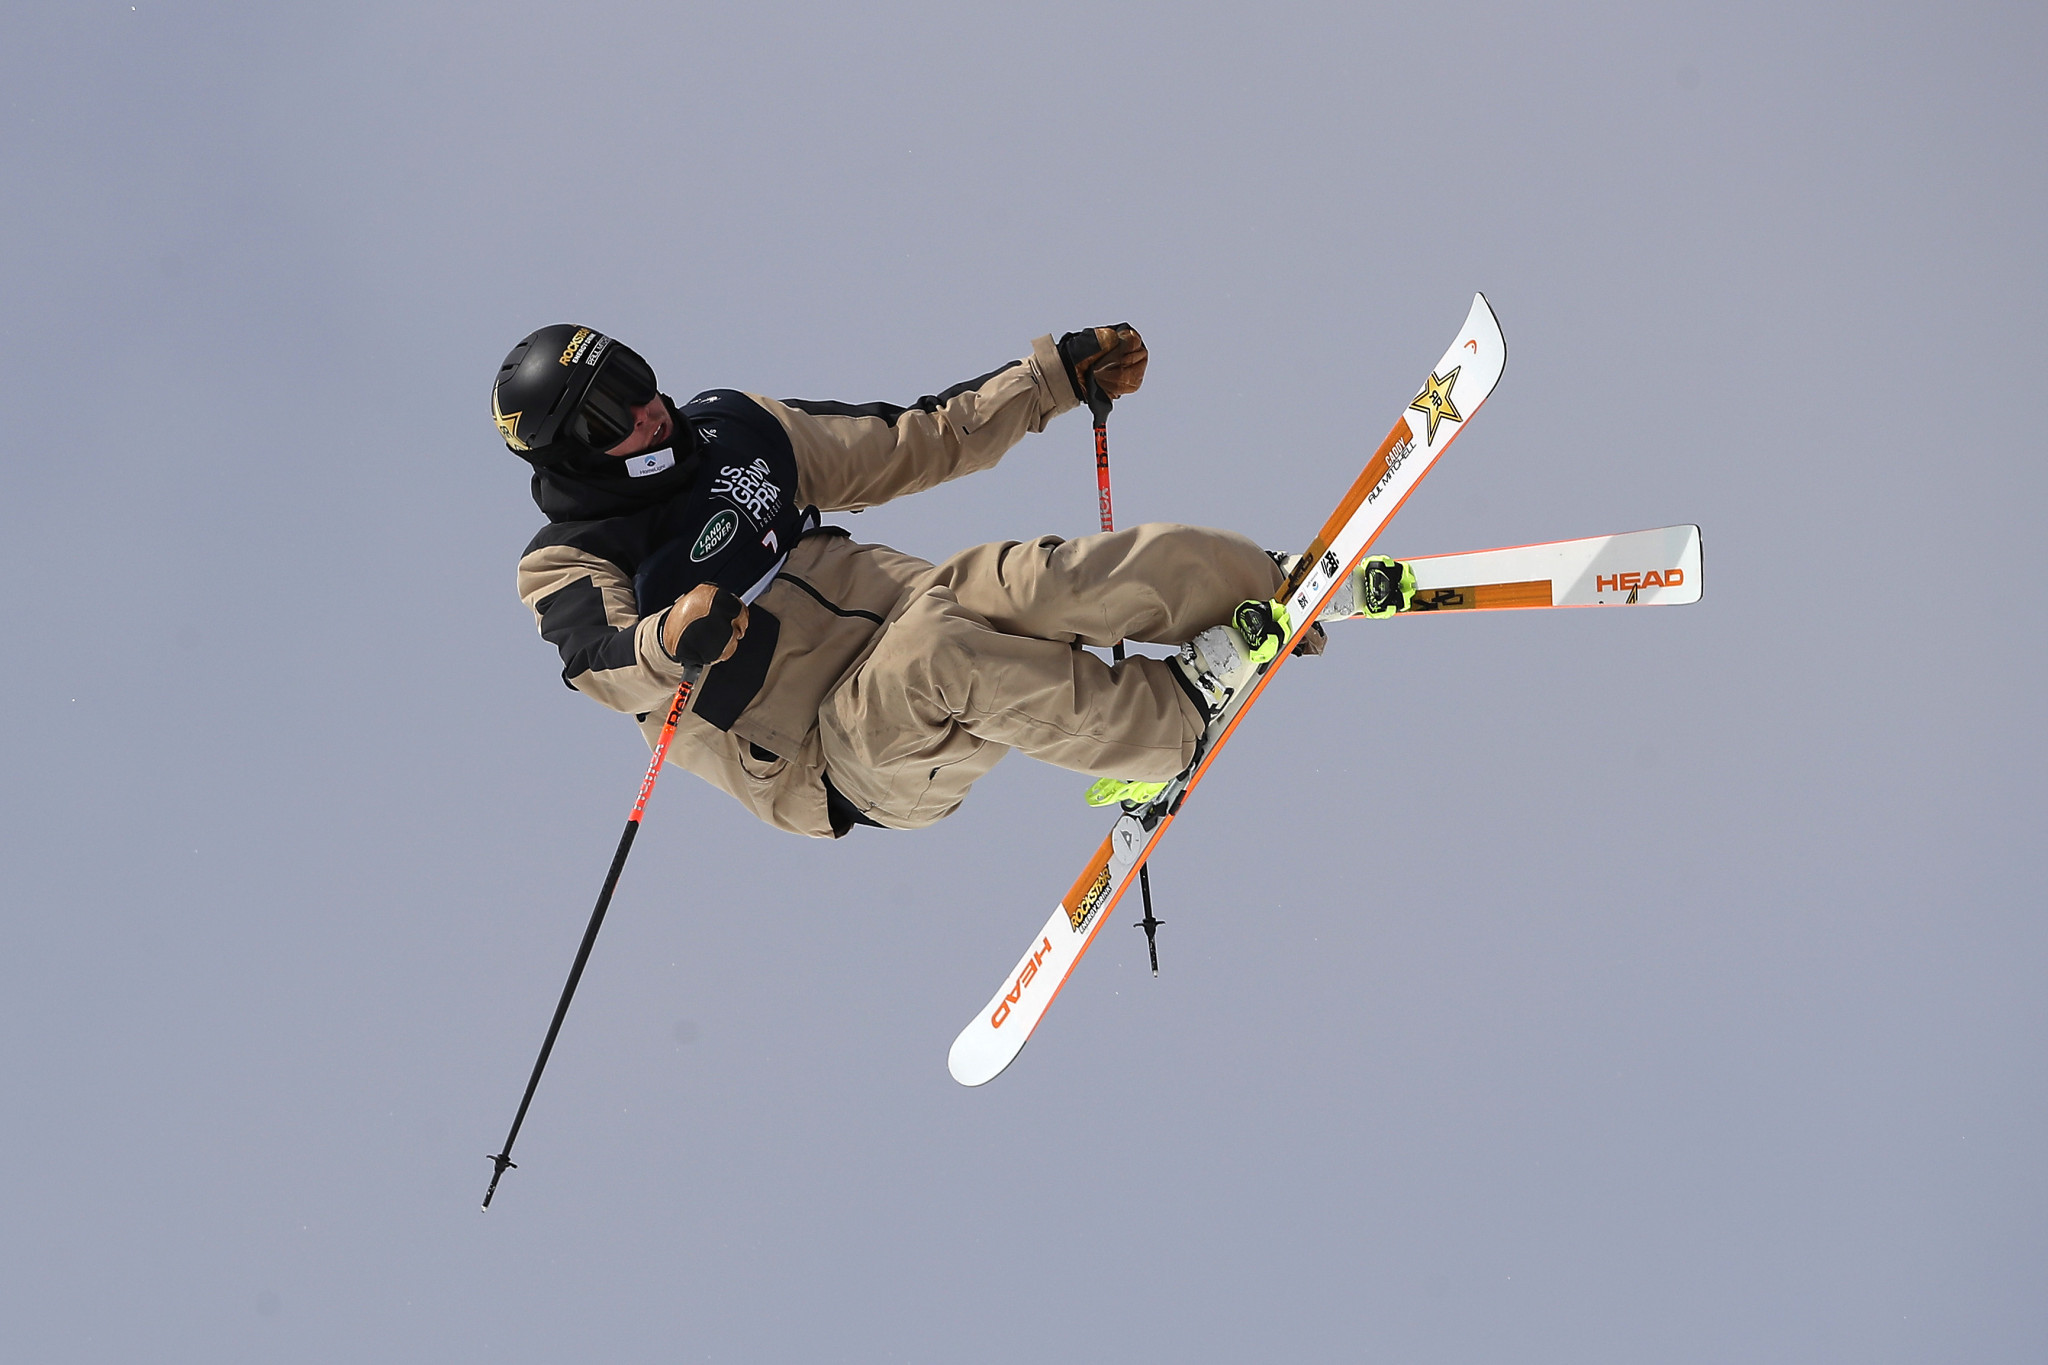 Aaron Blunck won the only halfpipe event on the FIS Freeski World Cup circuit last season ©Getty Images